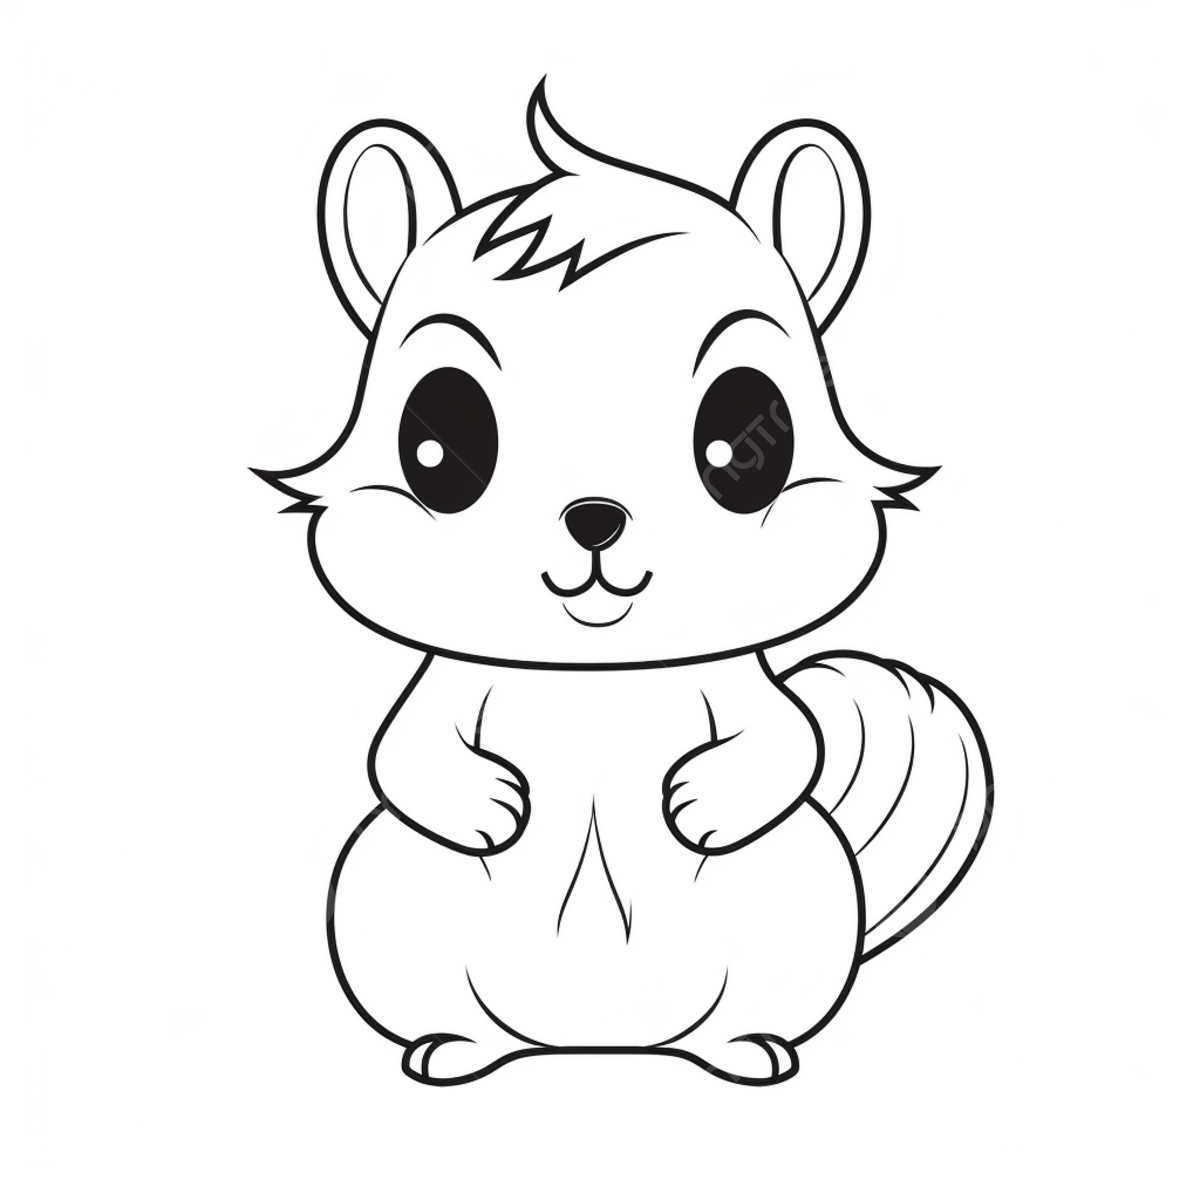 Cute cartoon squirrel coloring page car drawing cartoon drawing squirrel drawing png transparent image and clipart for free download